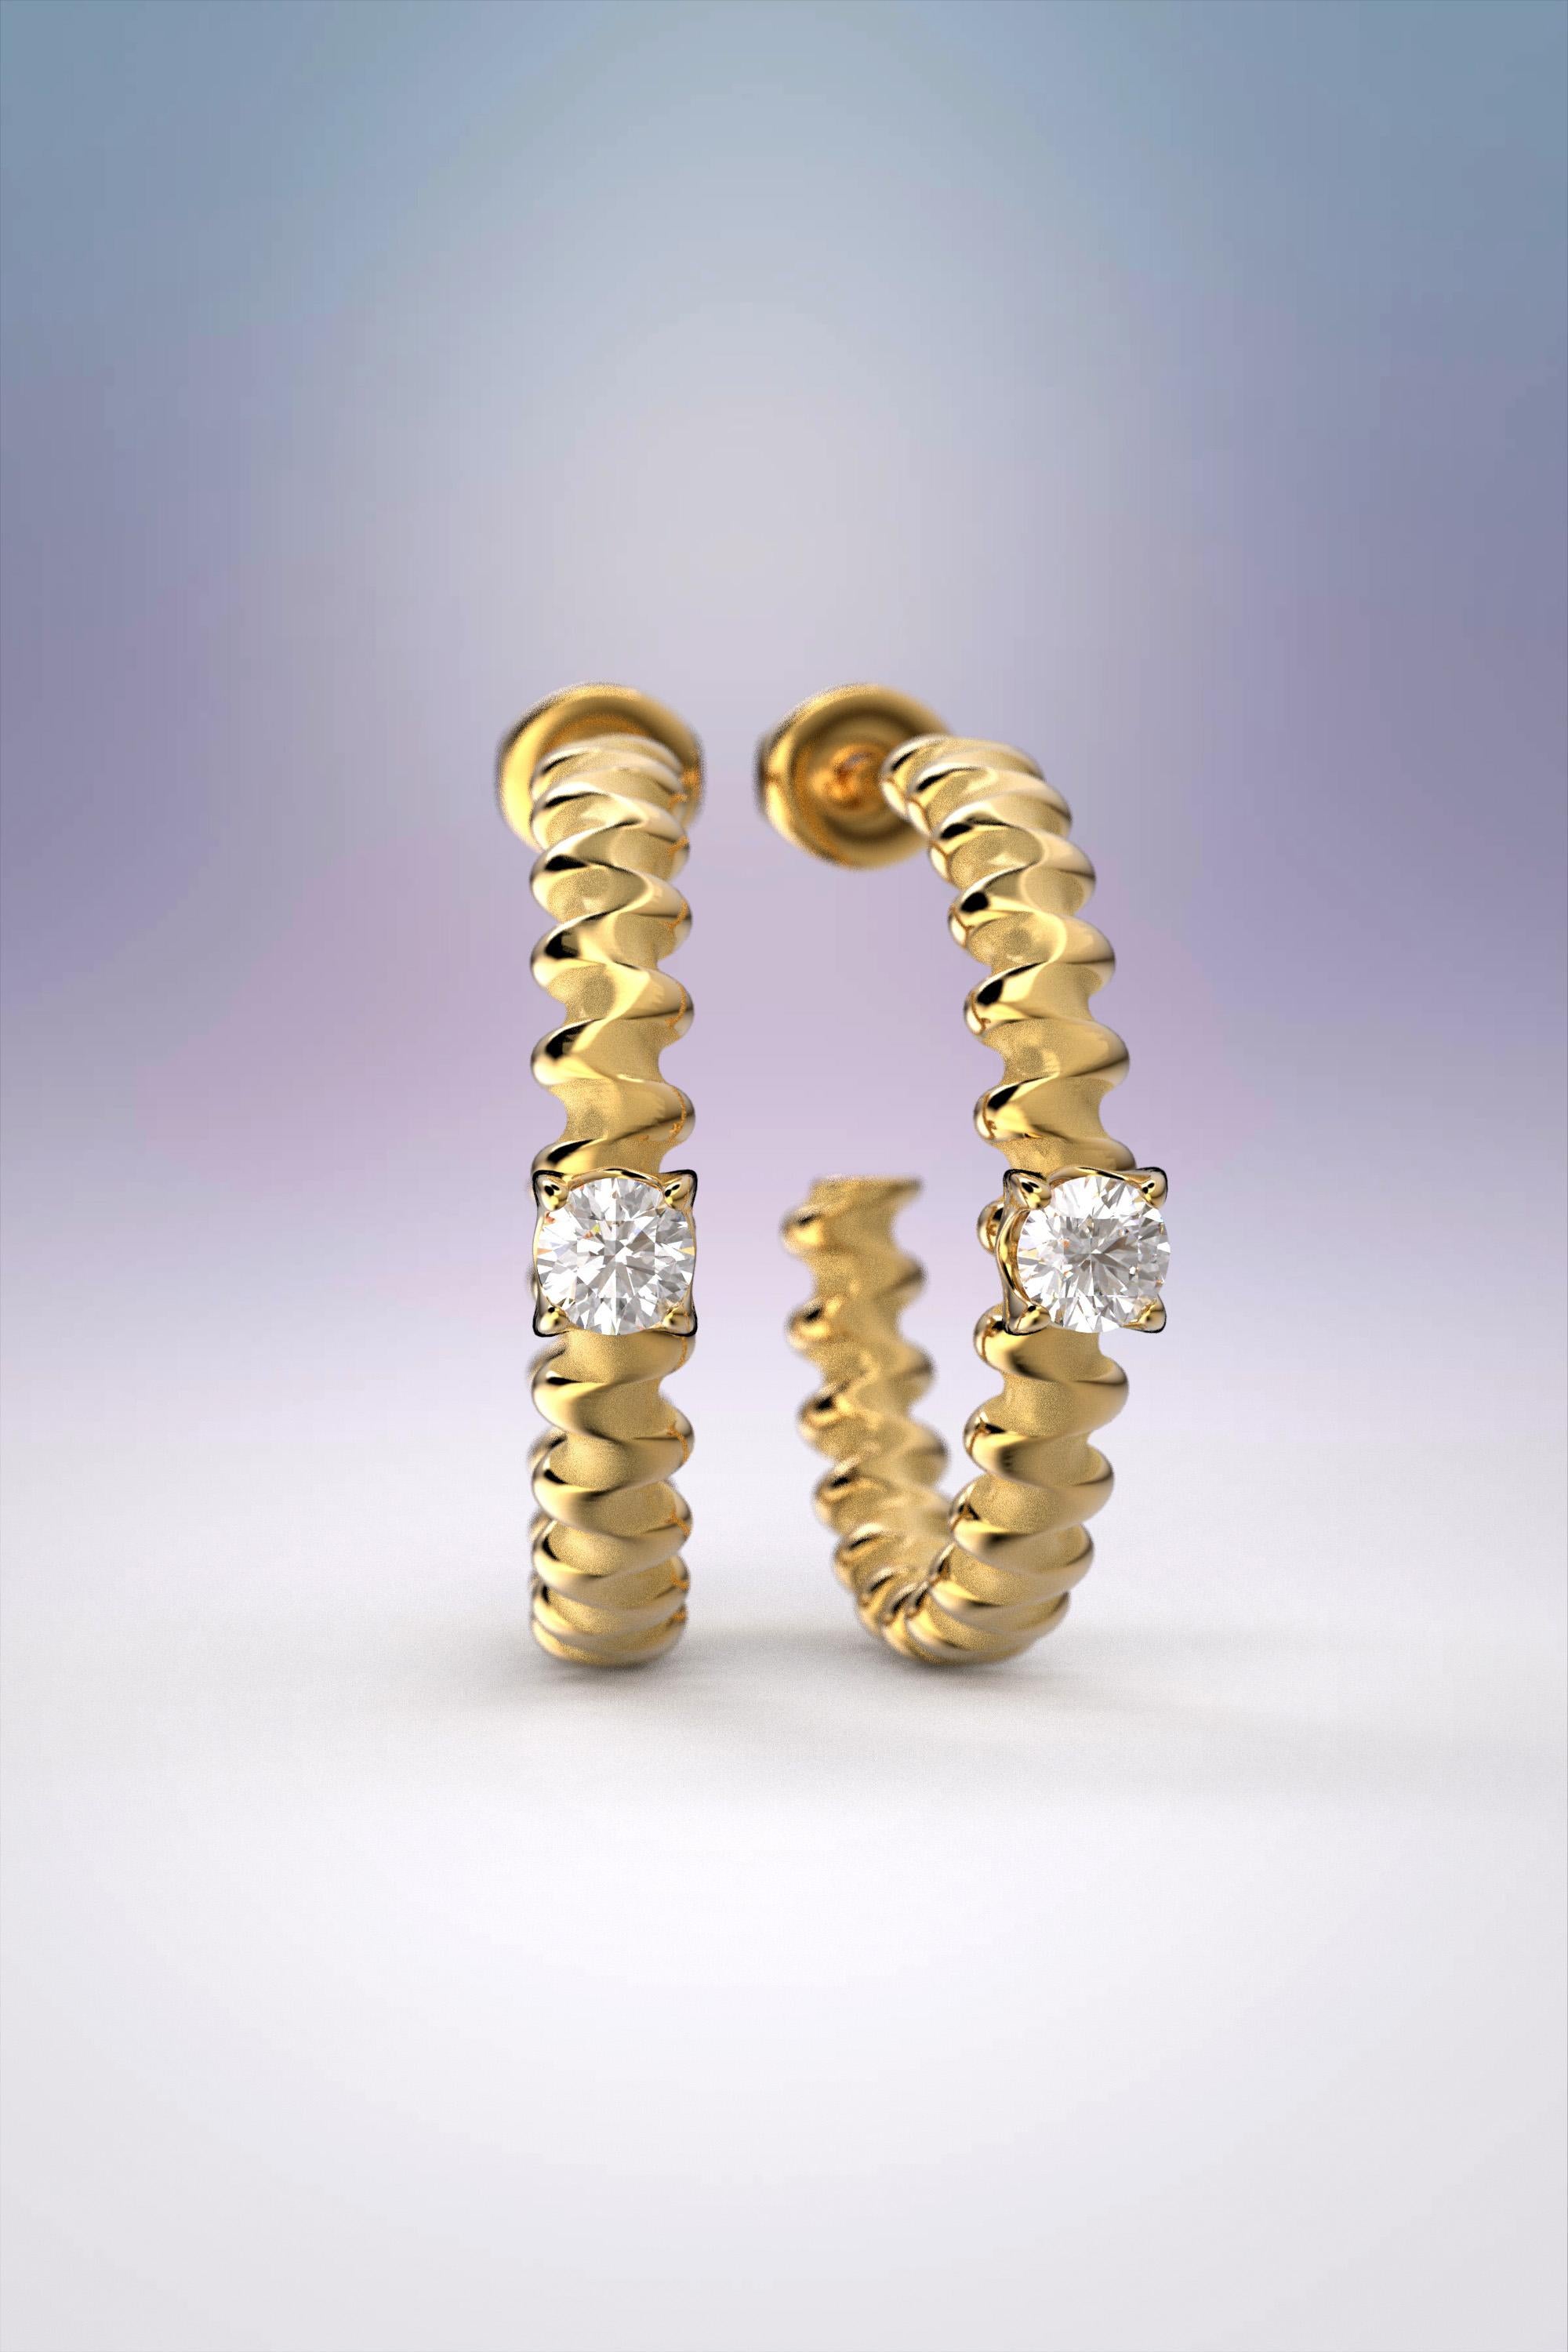 Contemporary Oltremare Gioielli 18k Diamond Gold Hoop Earrings Designed and Crafted in Italy For Sale